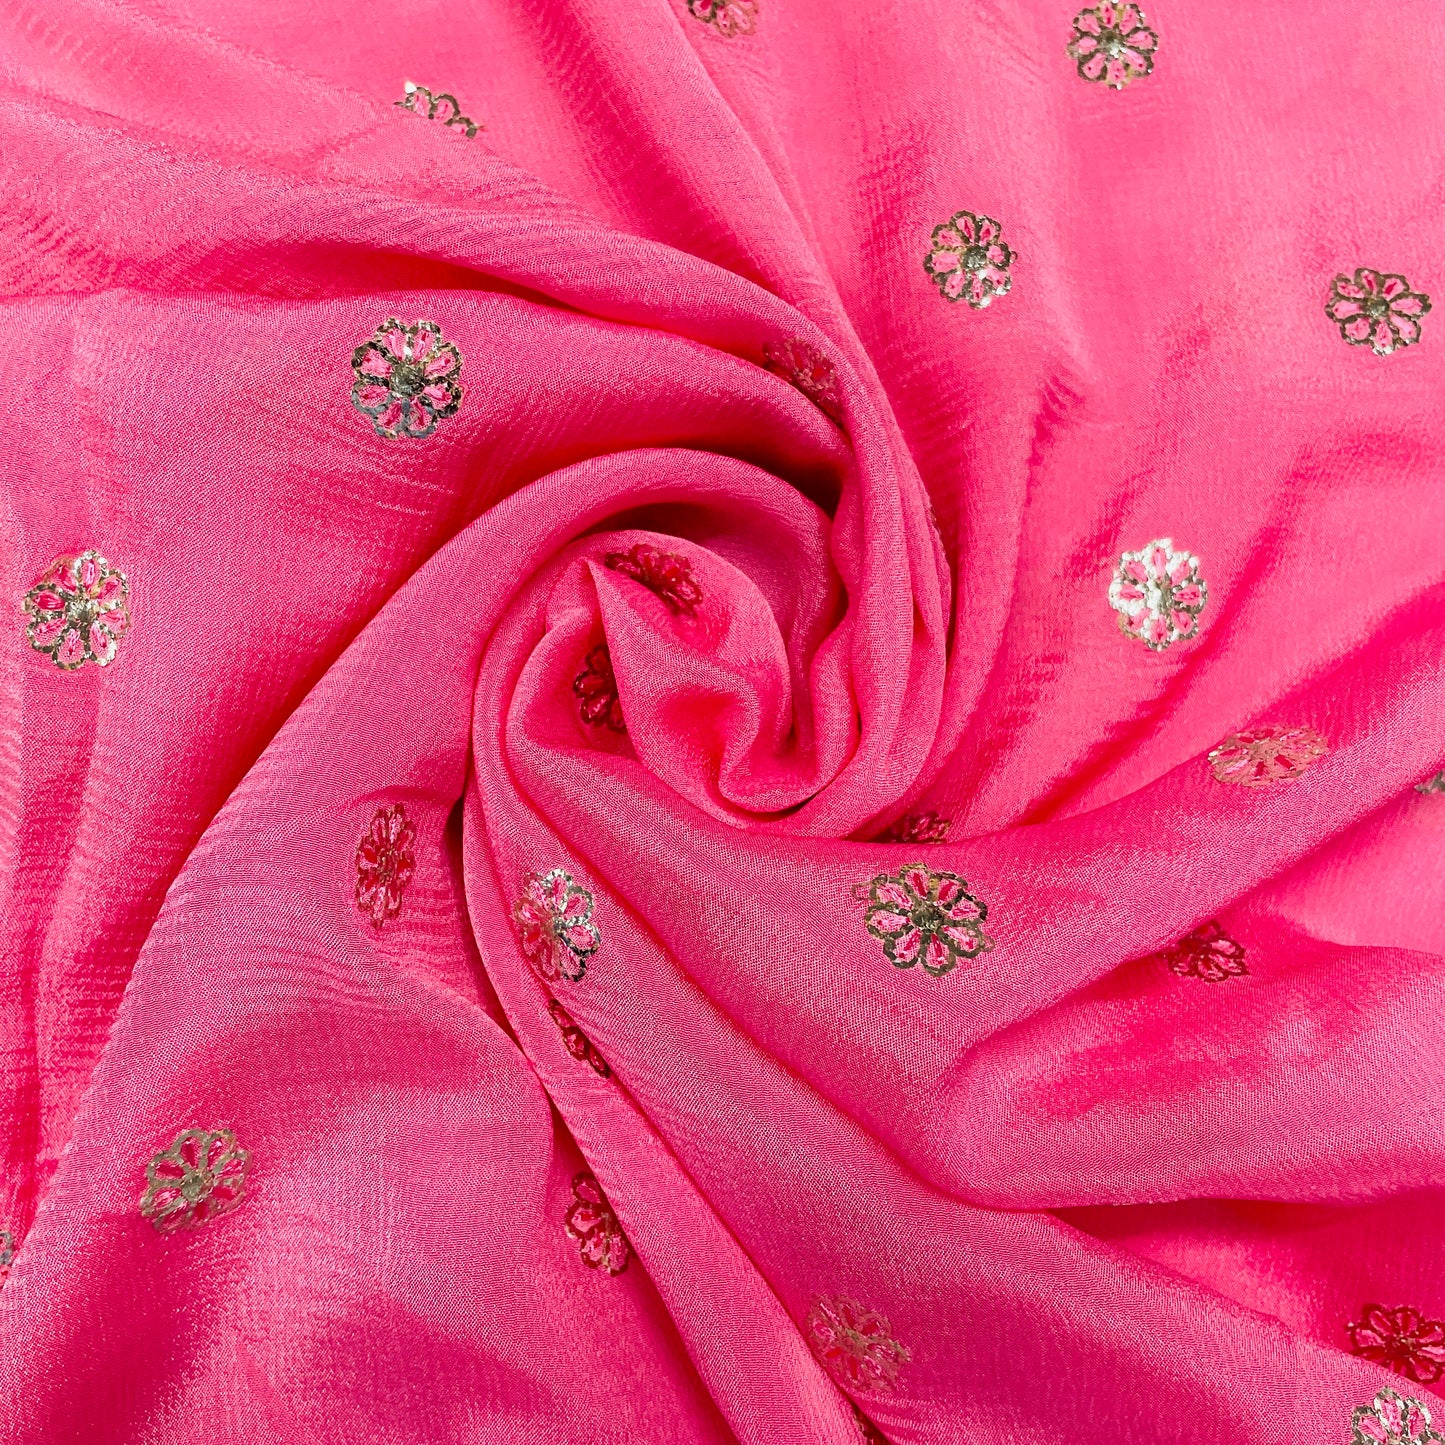 Pink & Silver Floral Sequence Thread Embroidery Chinnon Fabric - TradeUNO